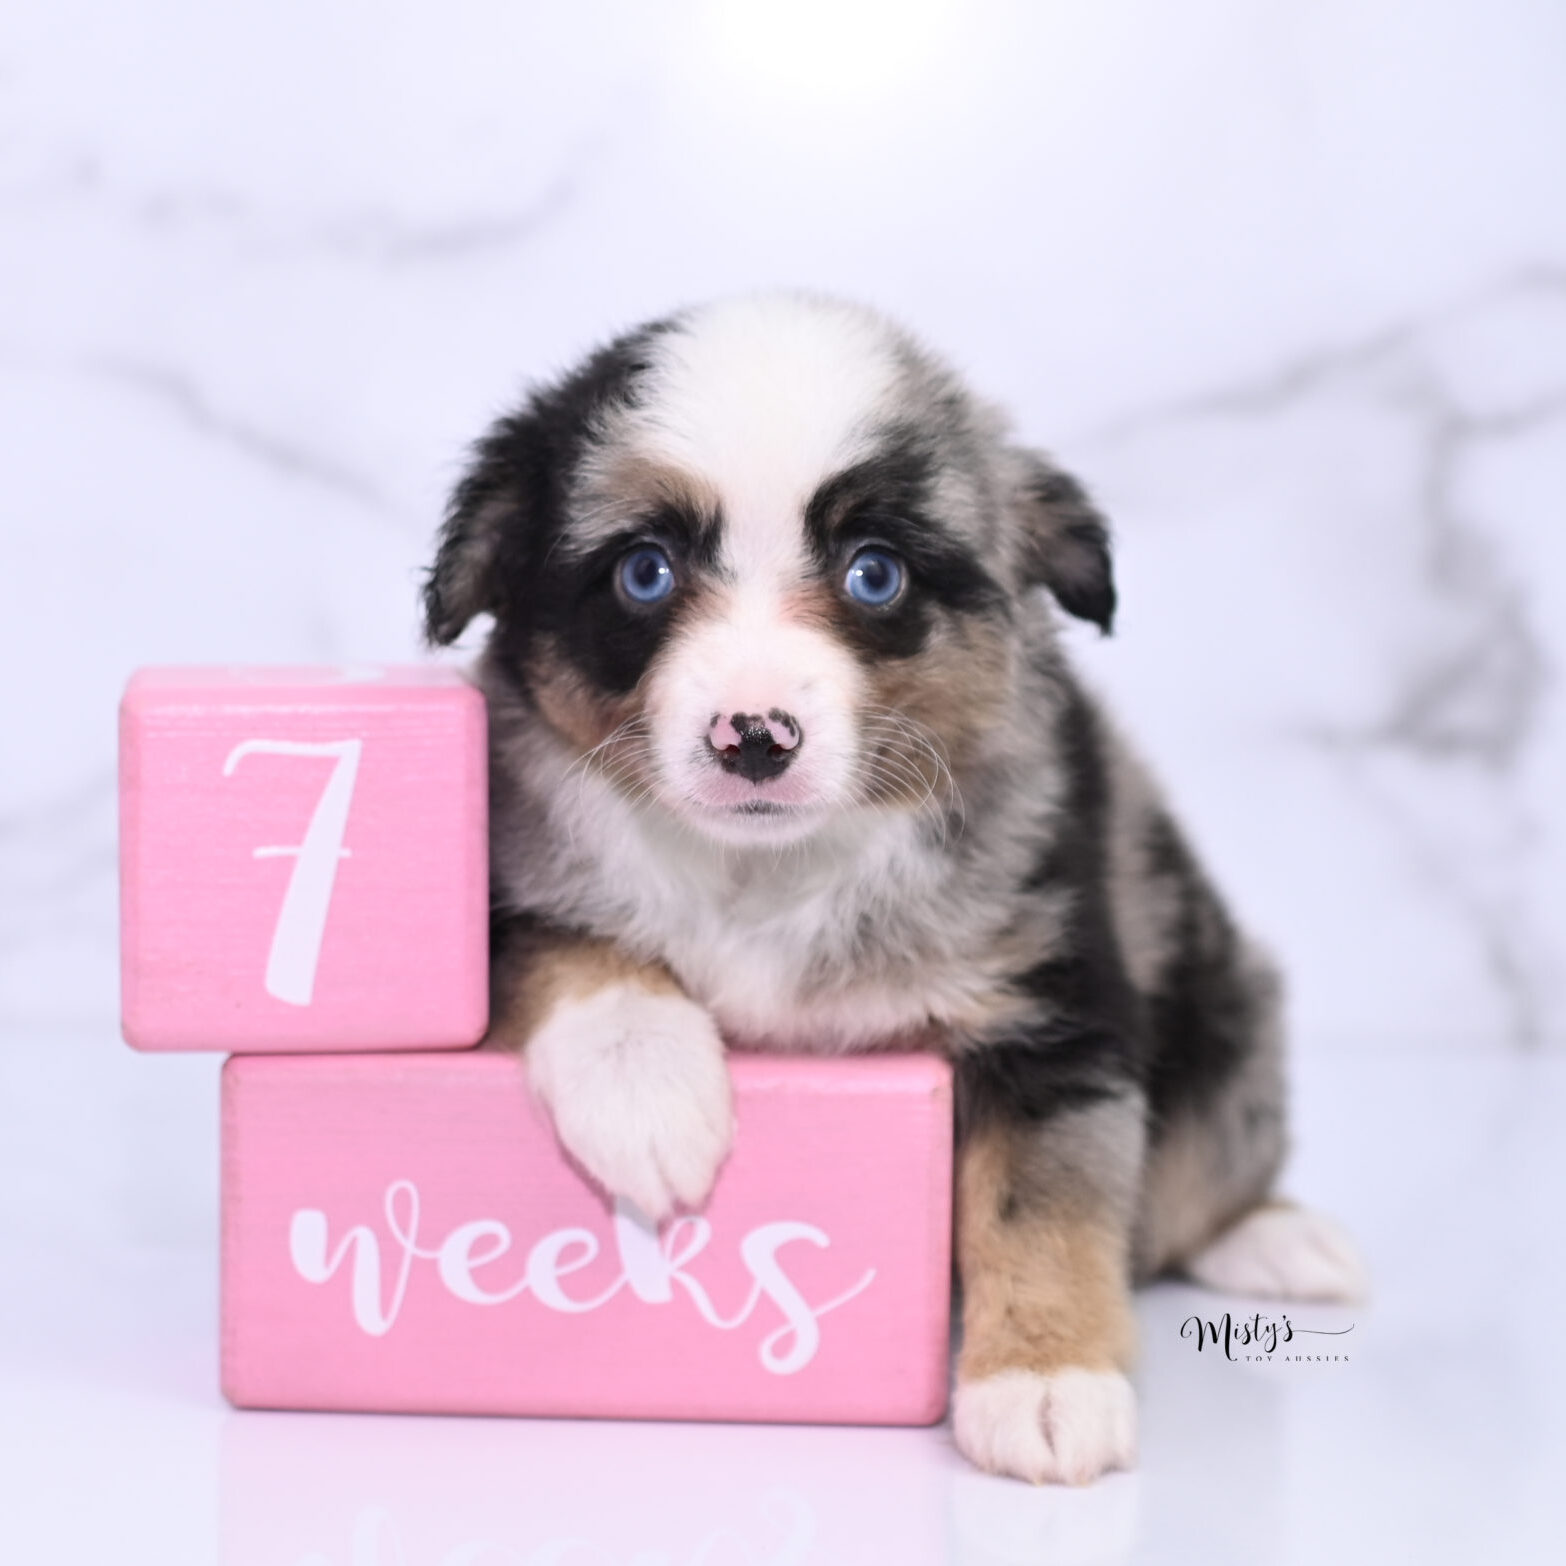 Mistys Toy Aussies Puppies Bandy 7 Weeks02